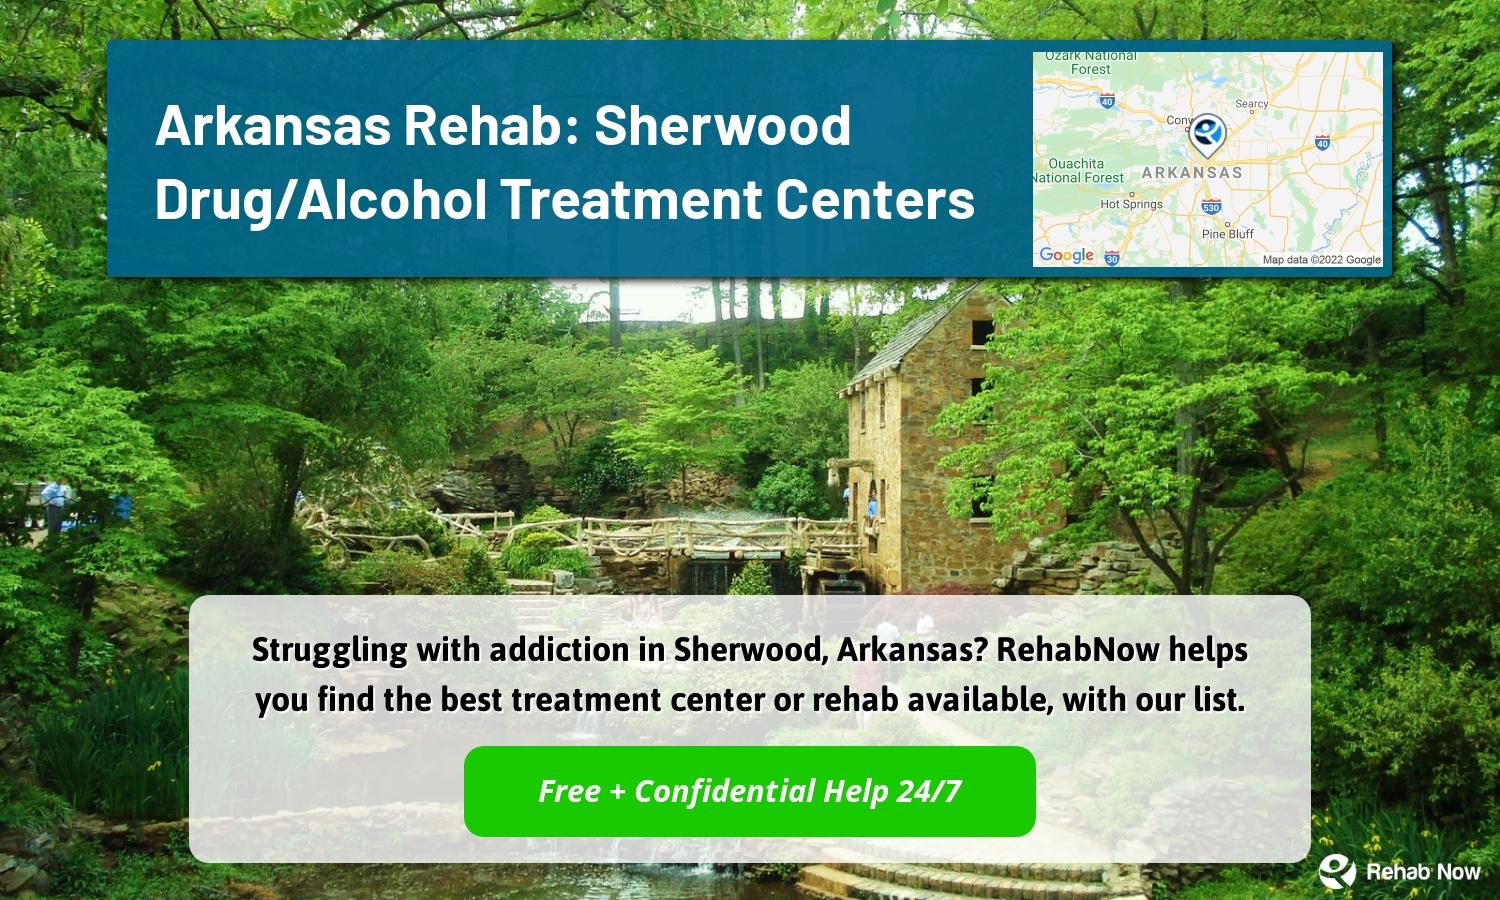 Struggling with addiction in Sherwood, Arkansas? RehabNow helps you find the best treatment center or rehab available, with our list.